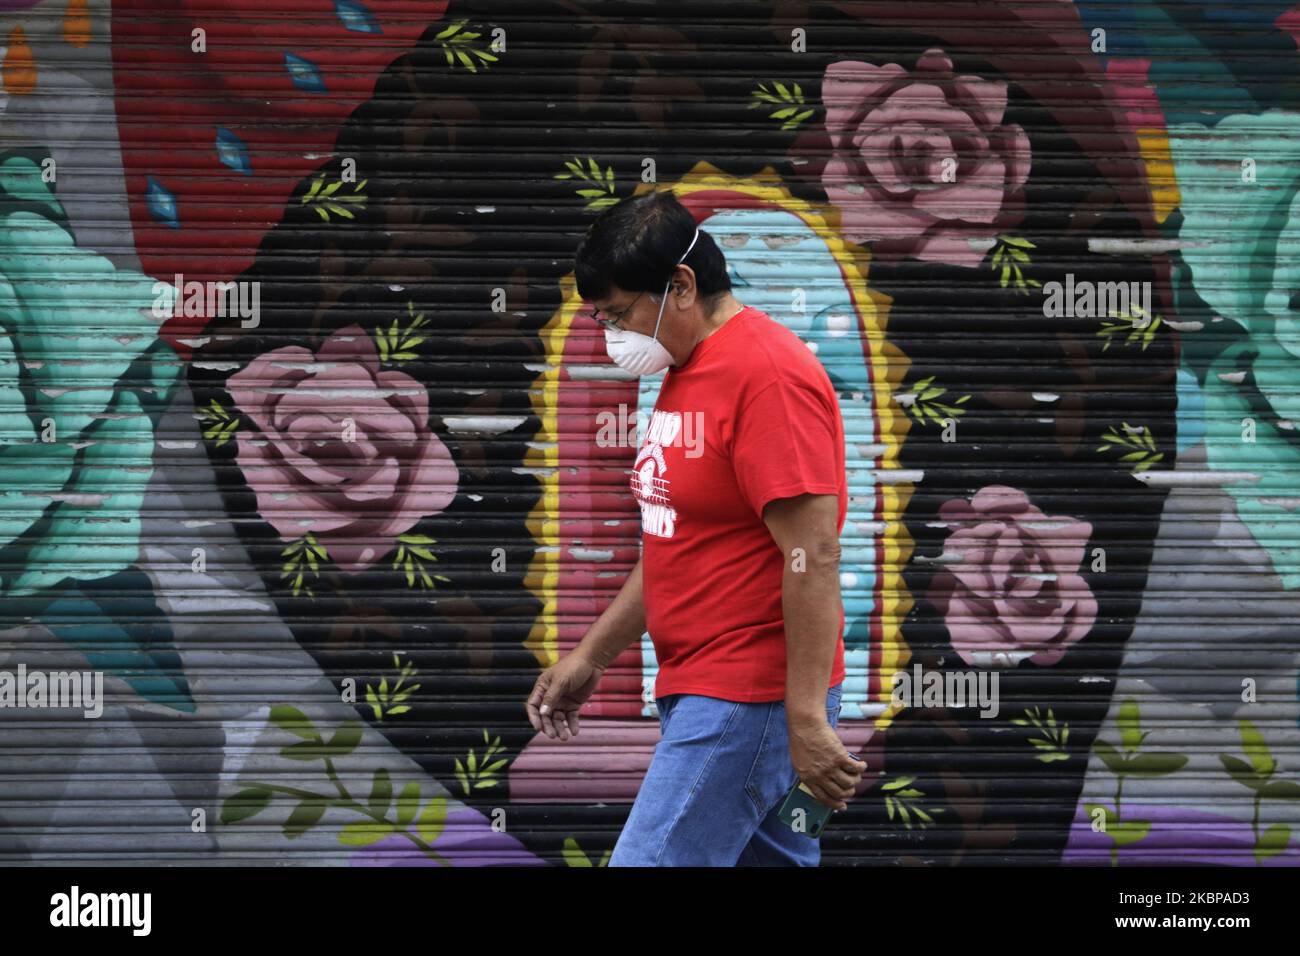 A man in the Zocalo of Mexico City, Mexico, o May 26, 2020 walks in front of a curtain with the image of some roses. The curtains of several businesses in the Historic Center of Mexico City have become protagonists to show the transit of its inhabitants during the Covid-19 health emergency in Mexico. They were intervened with the aim of providing spaces to young people who want to show their artistic skills inspired by various themes such as religion, culture, daily life, entertainment, among others. (Photo by Gerardo Vieyra/NurPhoto) Stock Photo